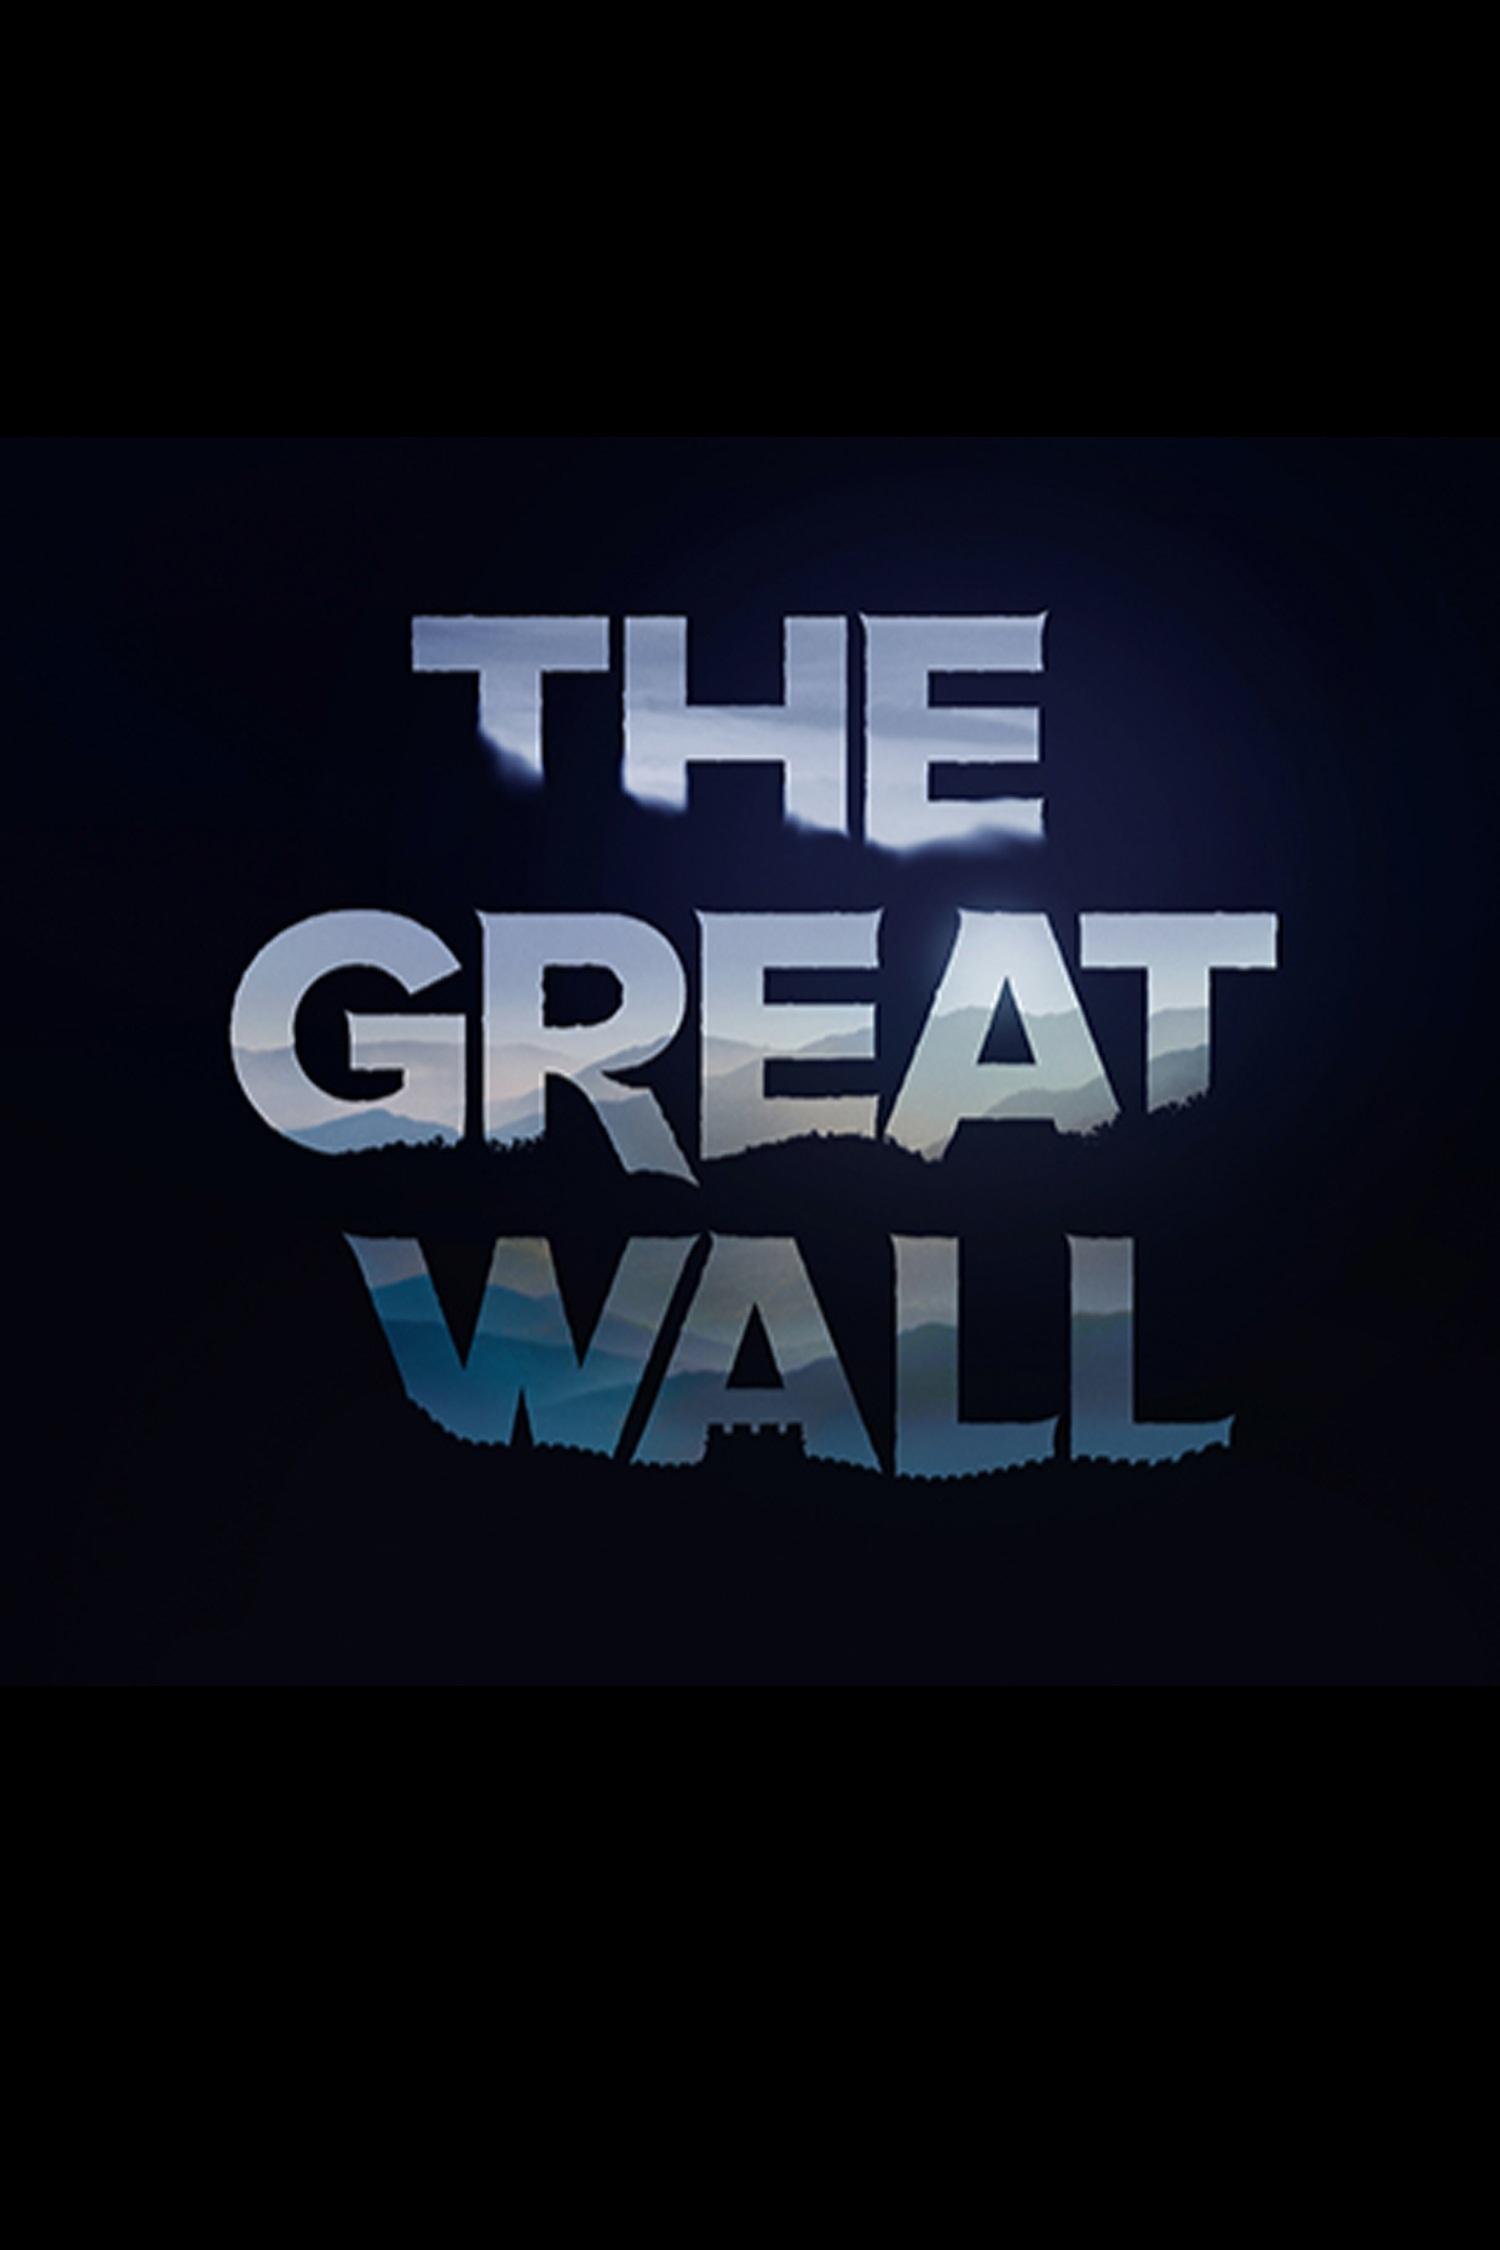 The Great Wall Movie Logo - The Great Wall. Nothing But Geek